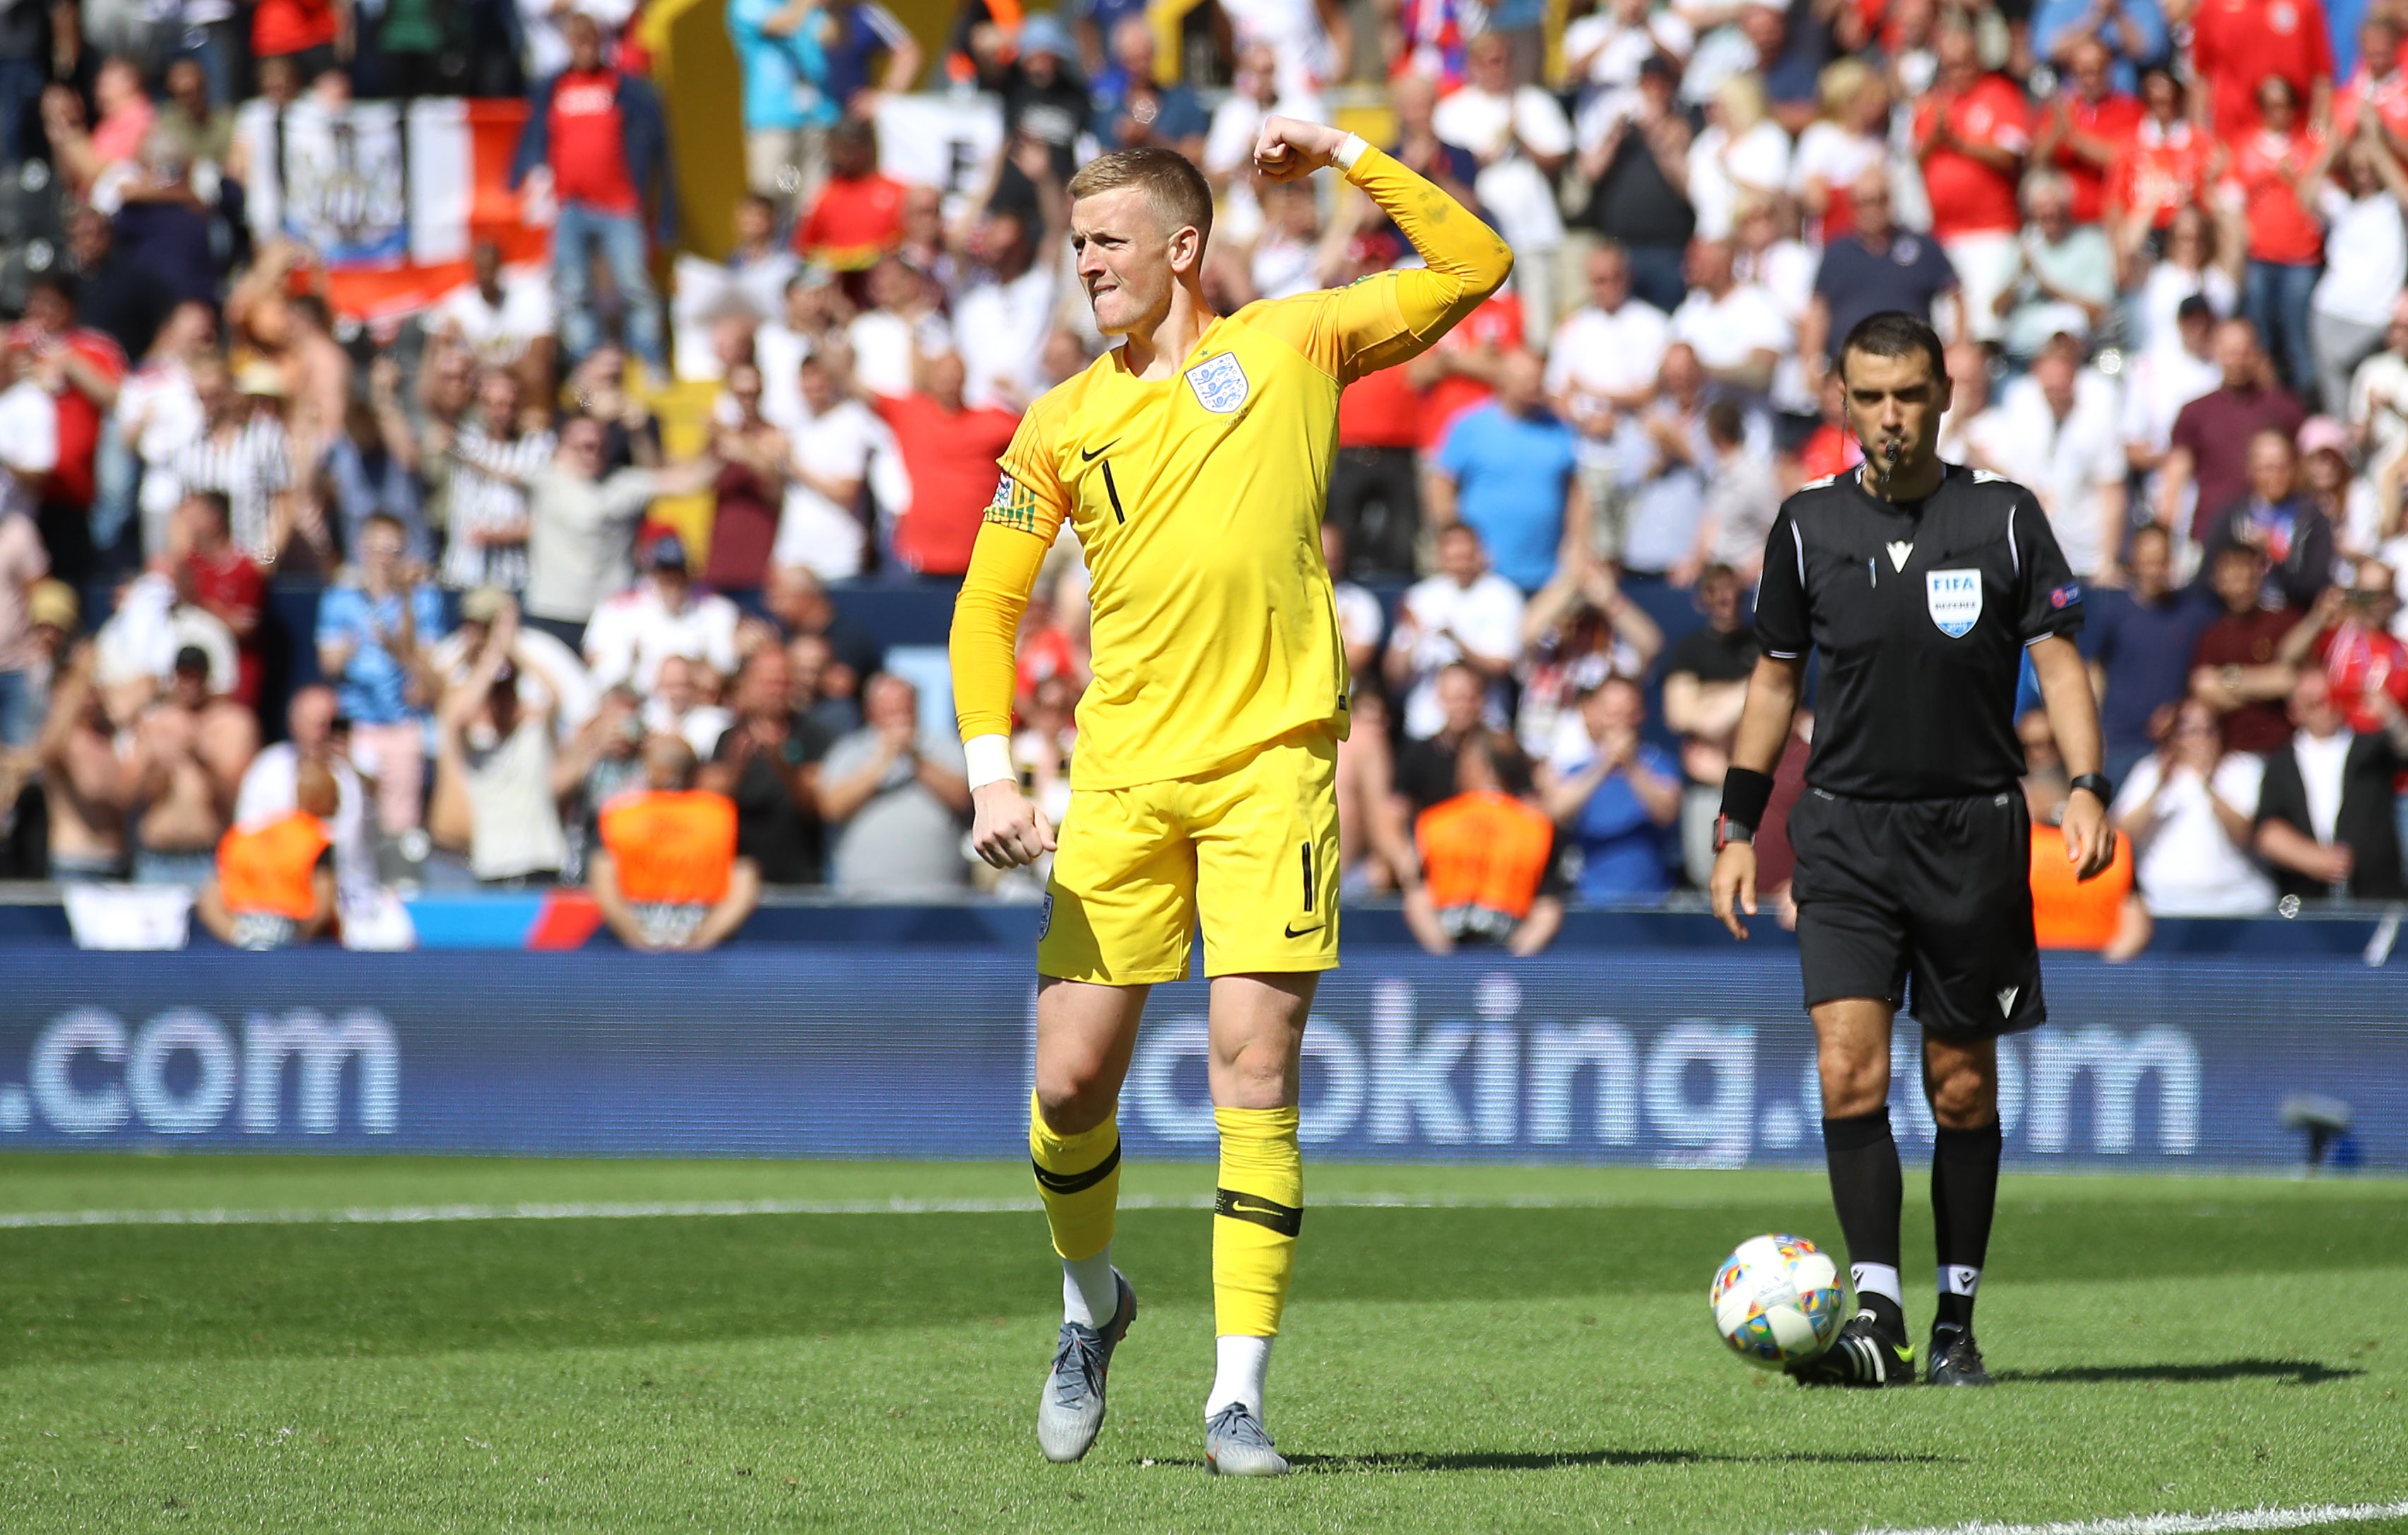 pa ready, jordan pickford, nations league, england, switzerland, guimaraes, dusseldorf, carlos bacca, everton, italy, history, slovakia, jordan pickford’s prepared to be put on the spot again in a shoot-out